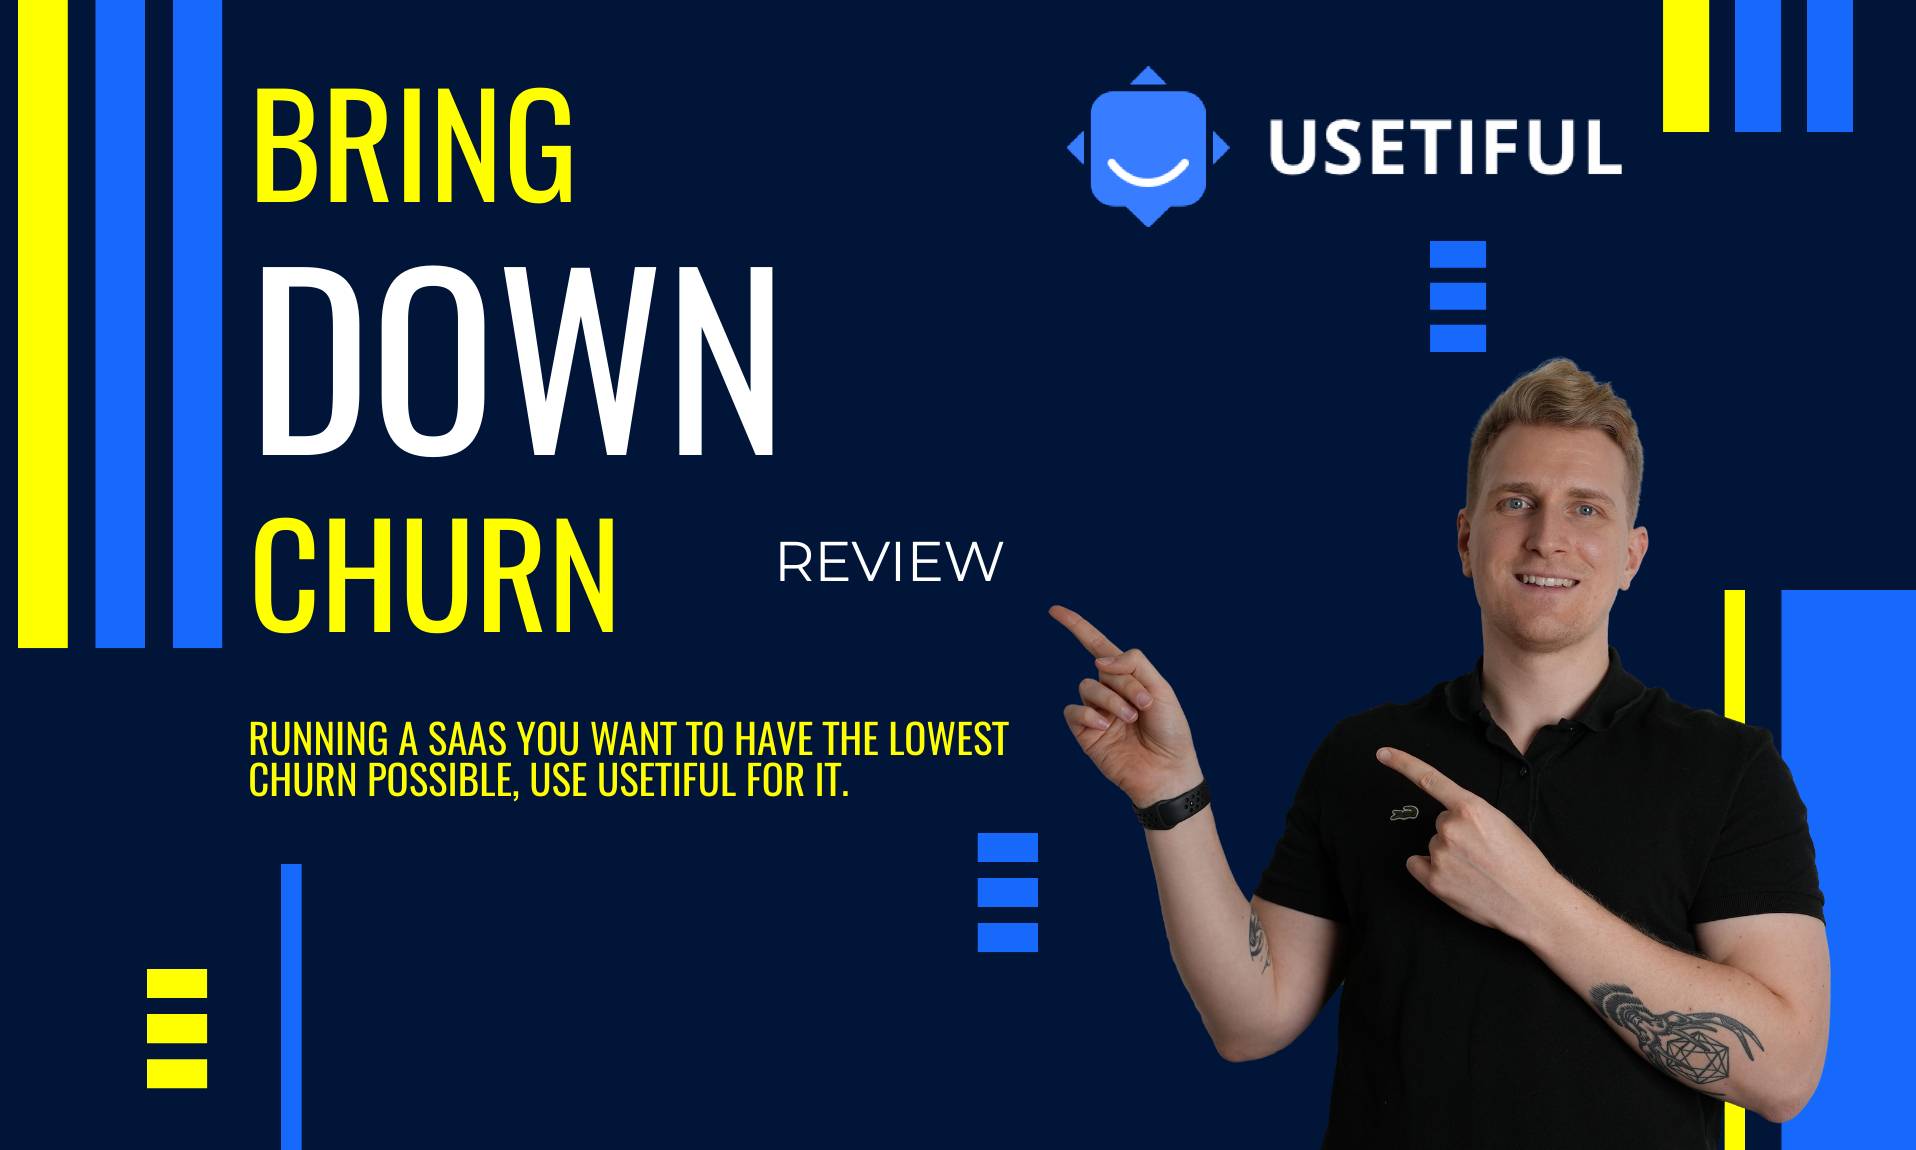 Usetiful Review - Build product tours and checklists for your customers | Walkme alternative